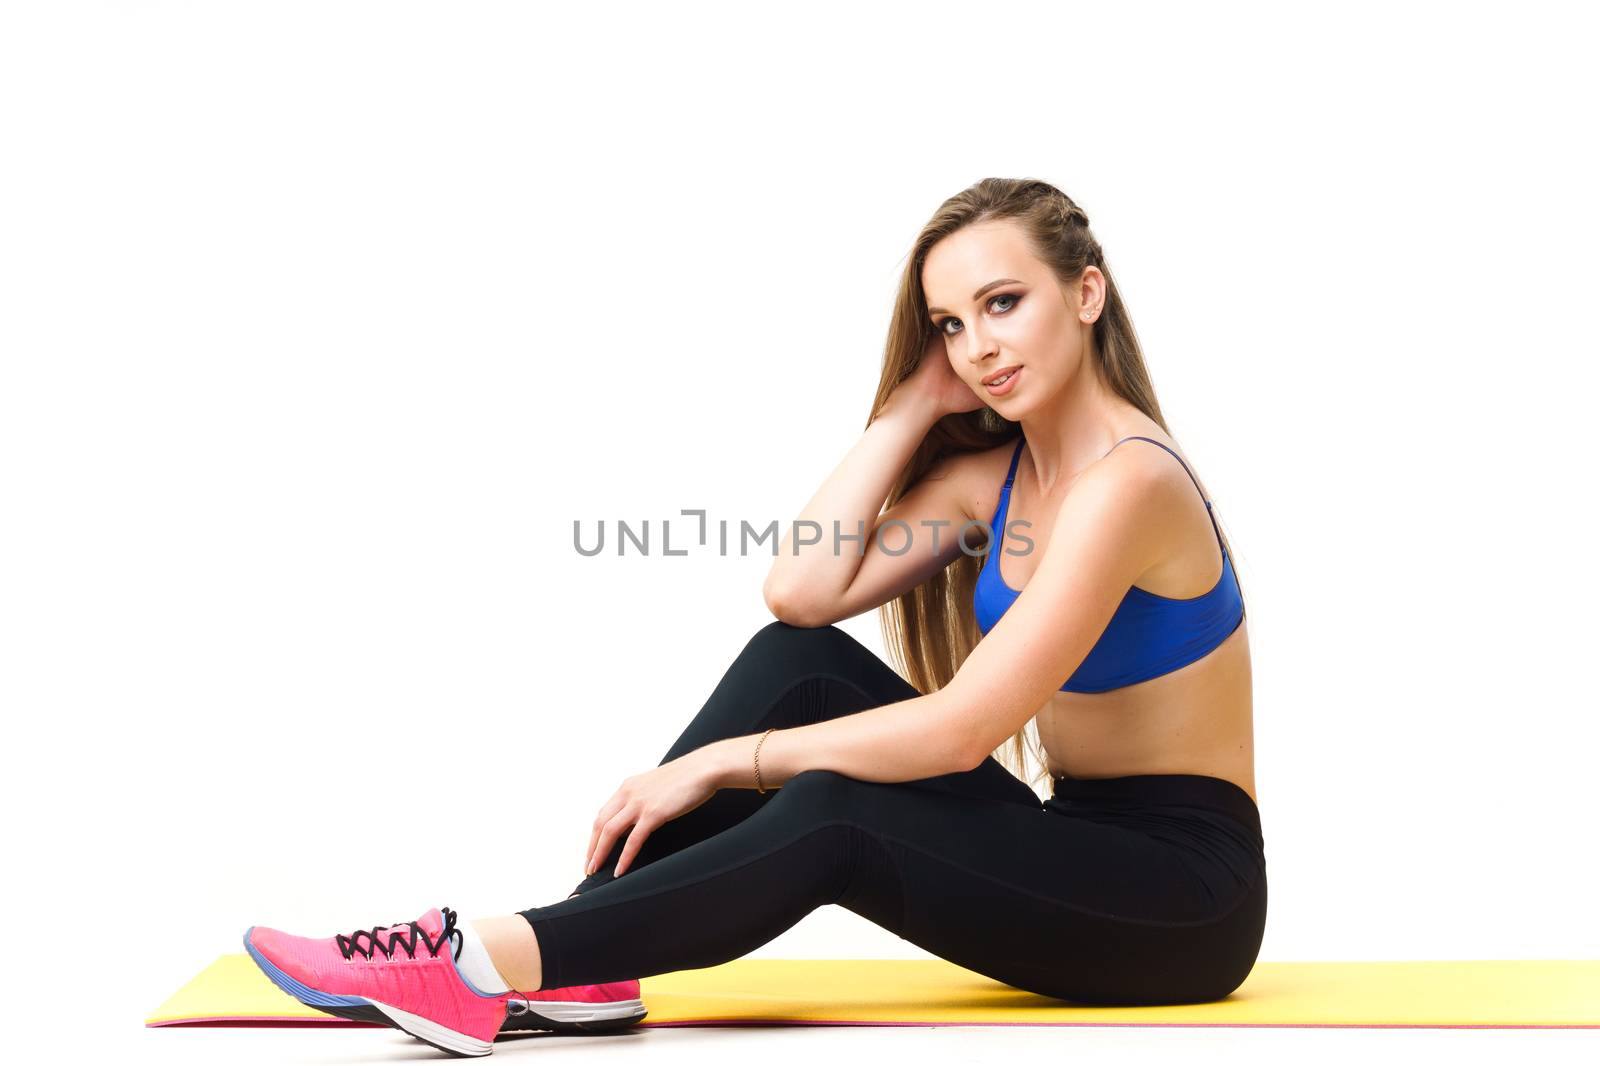 Concepts: healthy lifestyle, sport. Happy beautiful woman fitness trainer working out with yoga mat isolated on white background